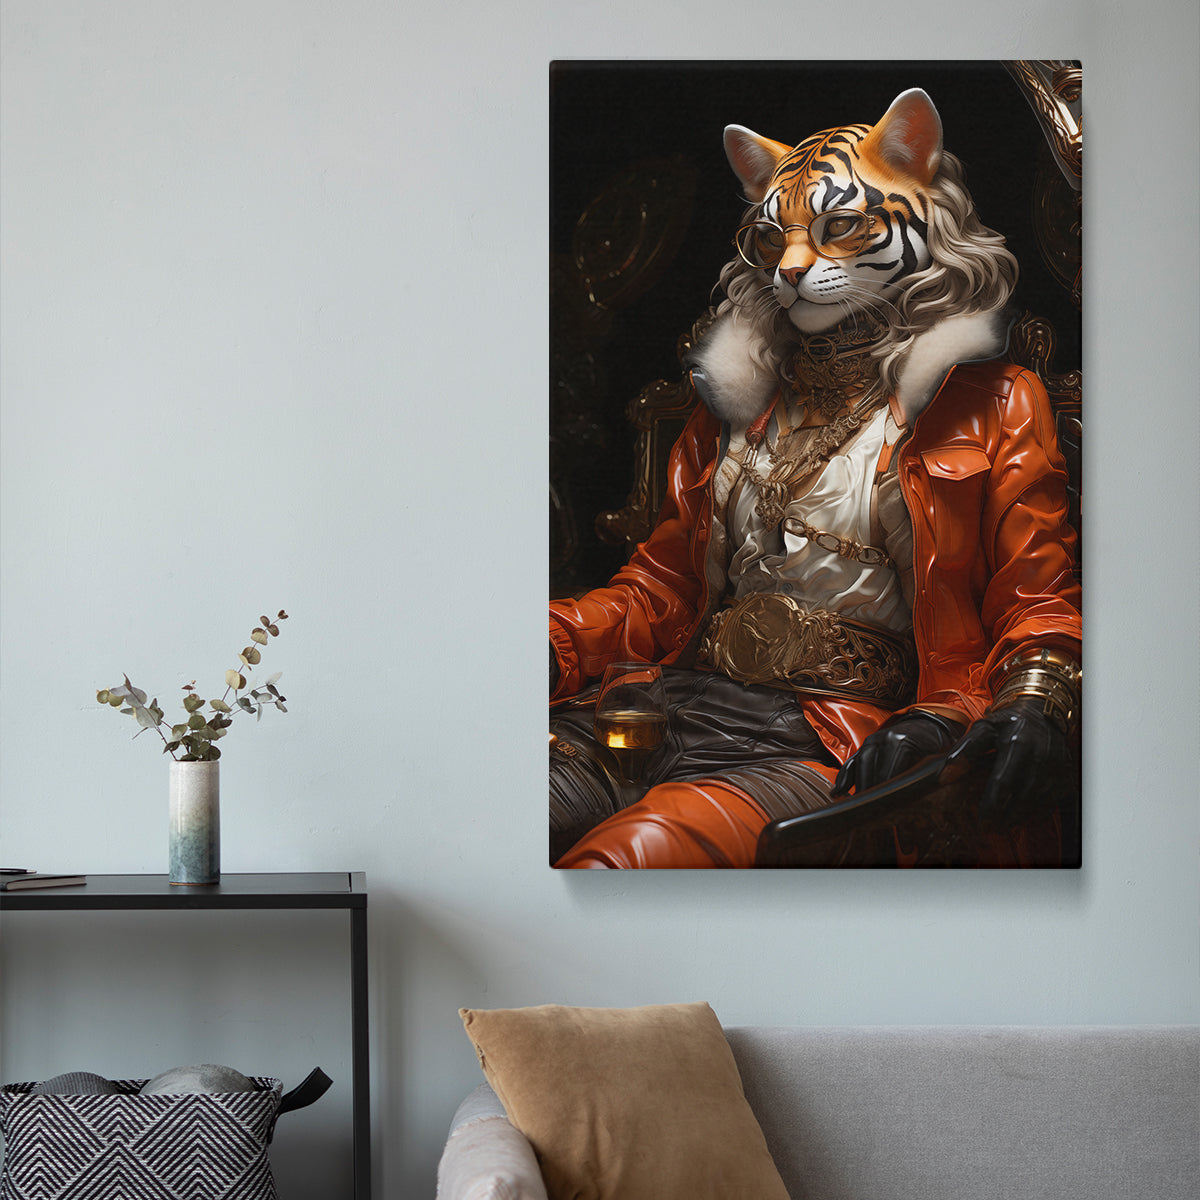 Tiger Monarch Majestic Aristocratic Animal Portrait for Office or Study Abstract Art Print Artesty 1 Panel 16"x24" 